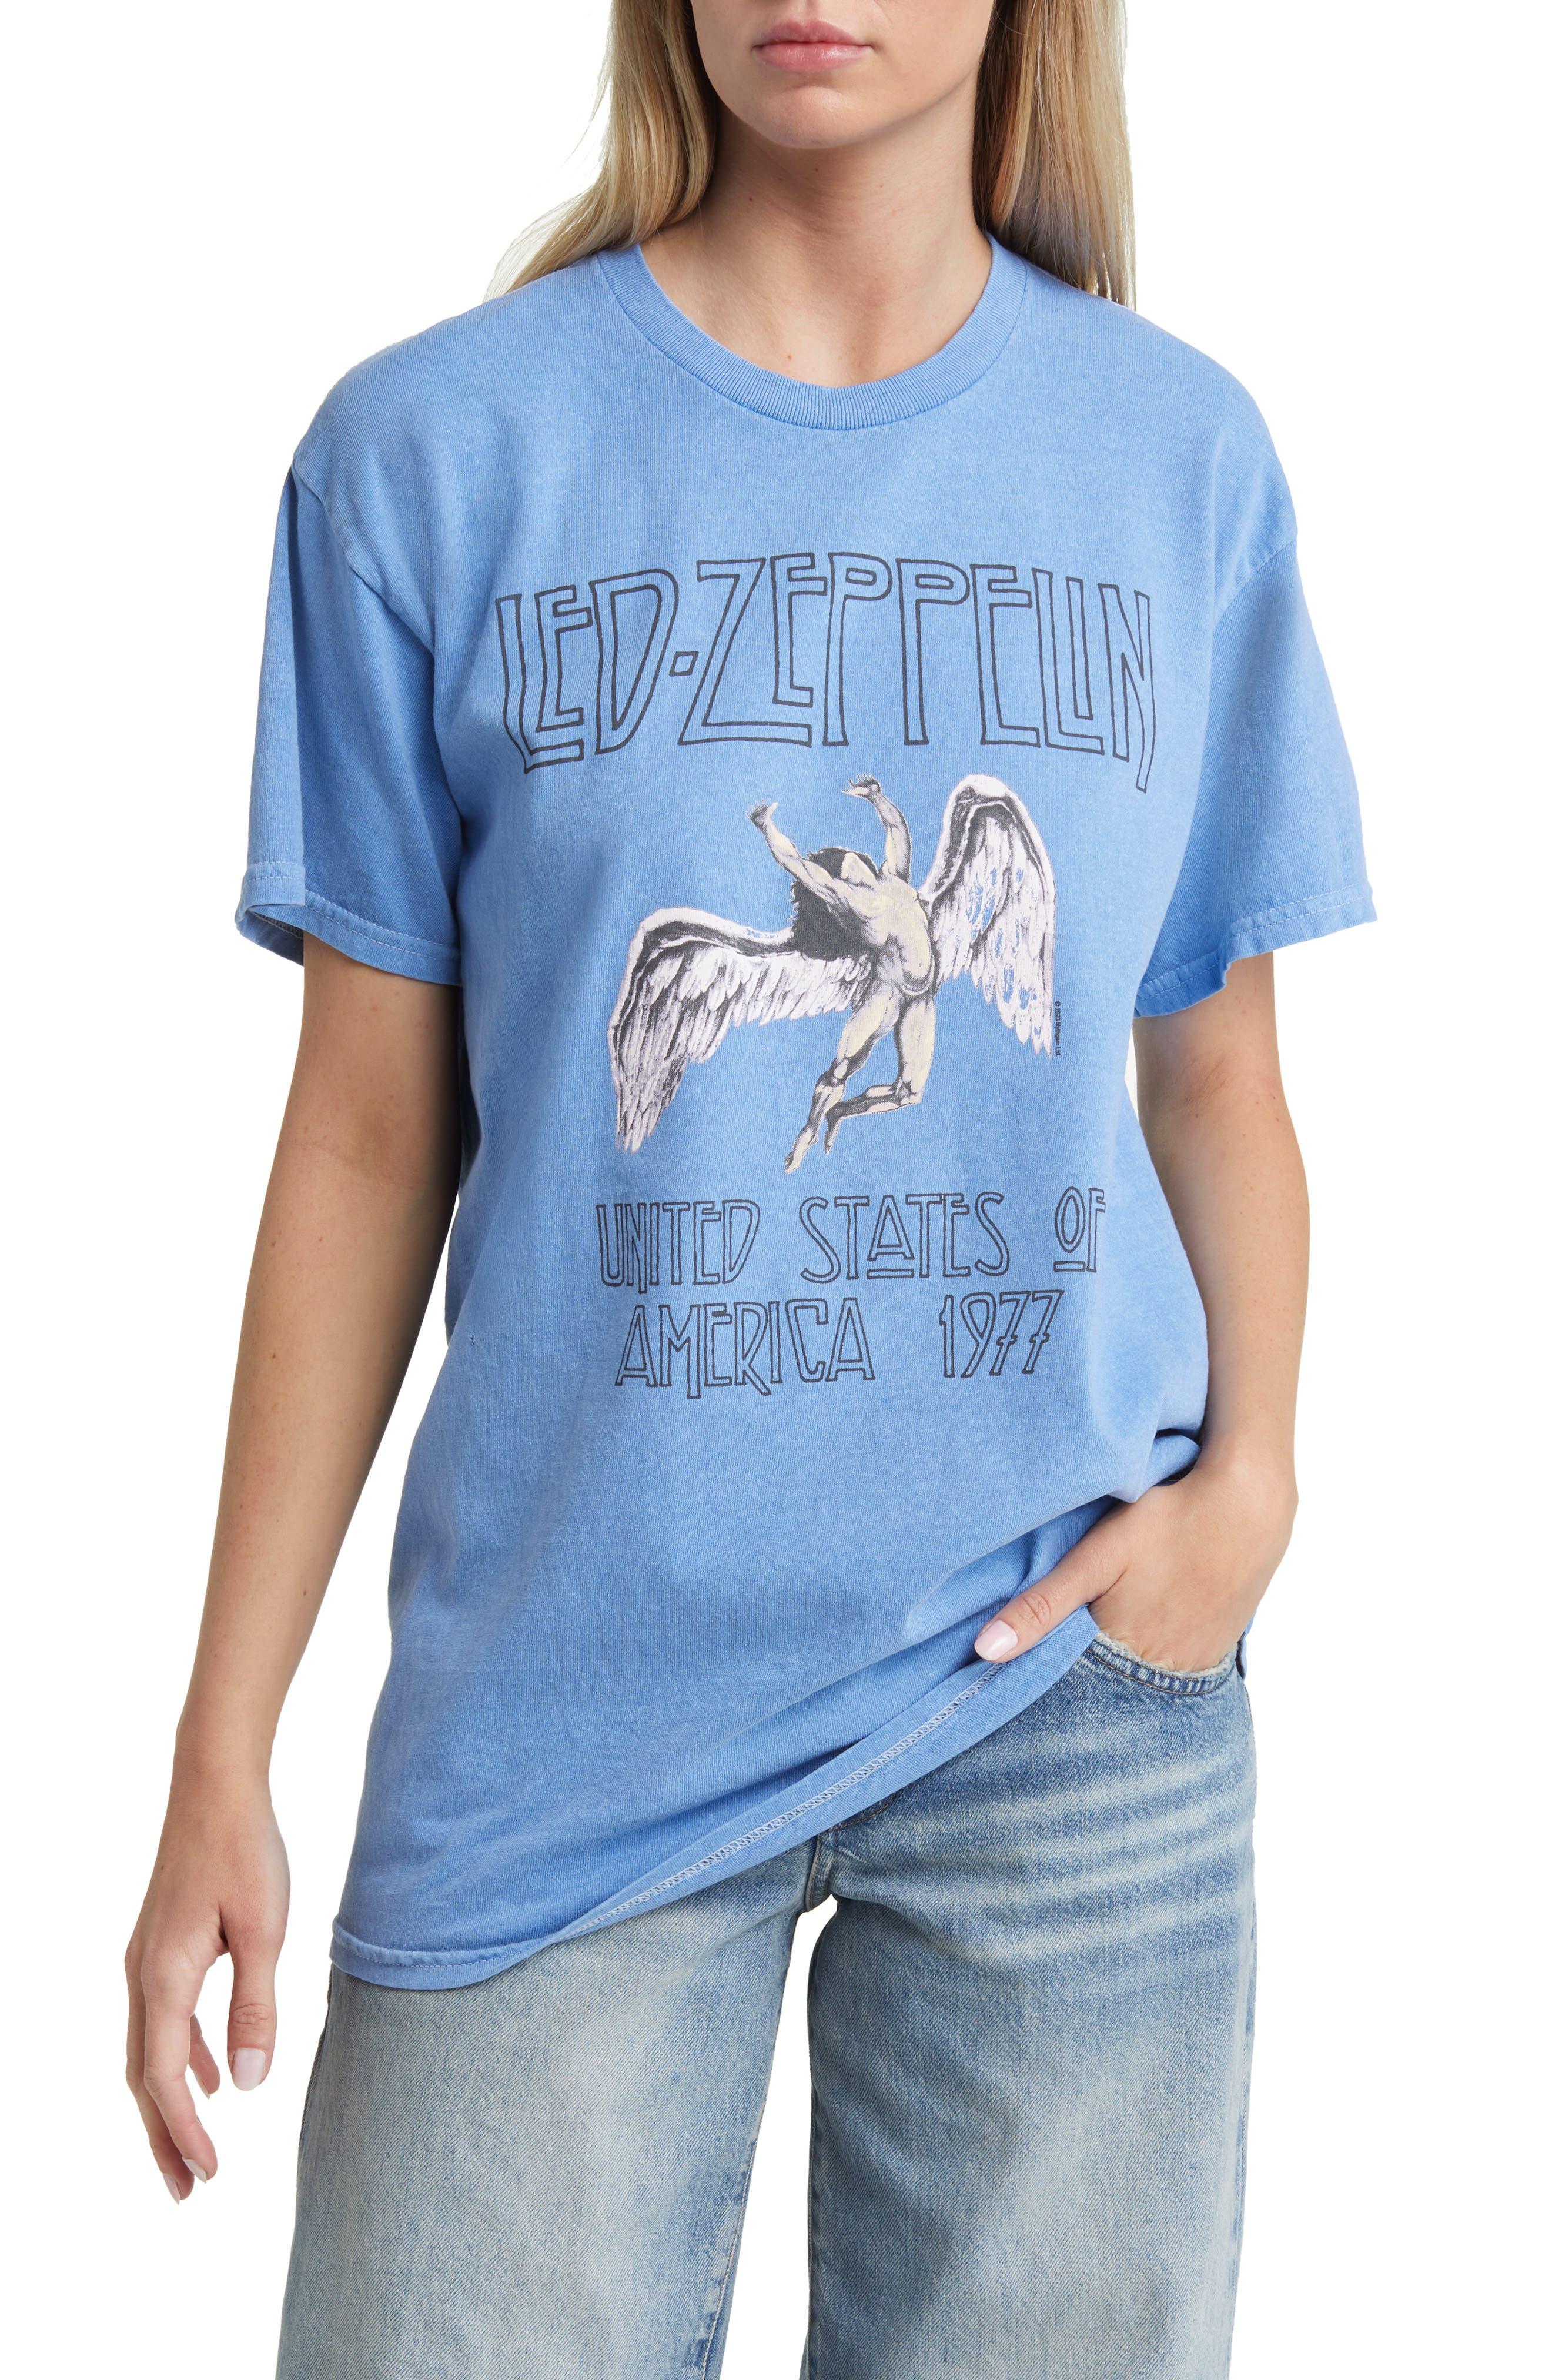 THE VINYL ICONS Led Zeppelin 1977 Tour Graphic T-shirt in Blue | Lyst